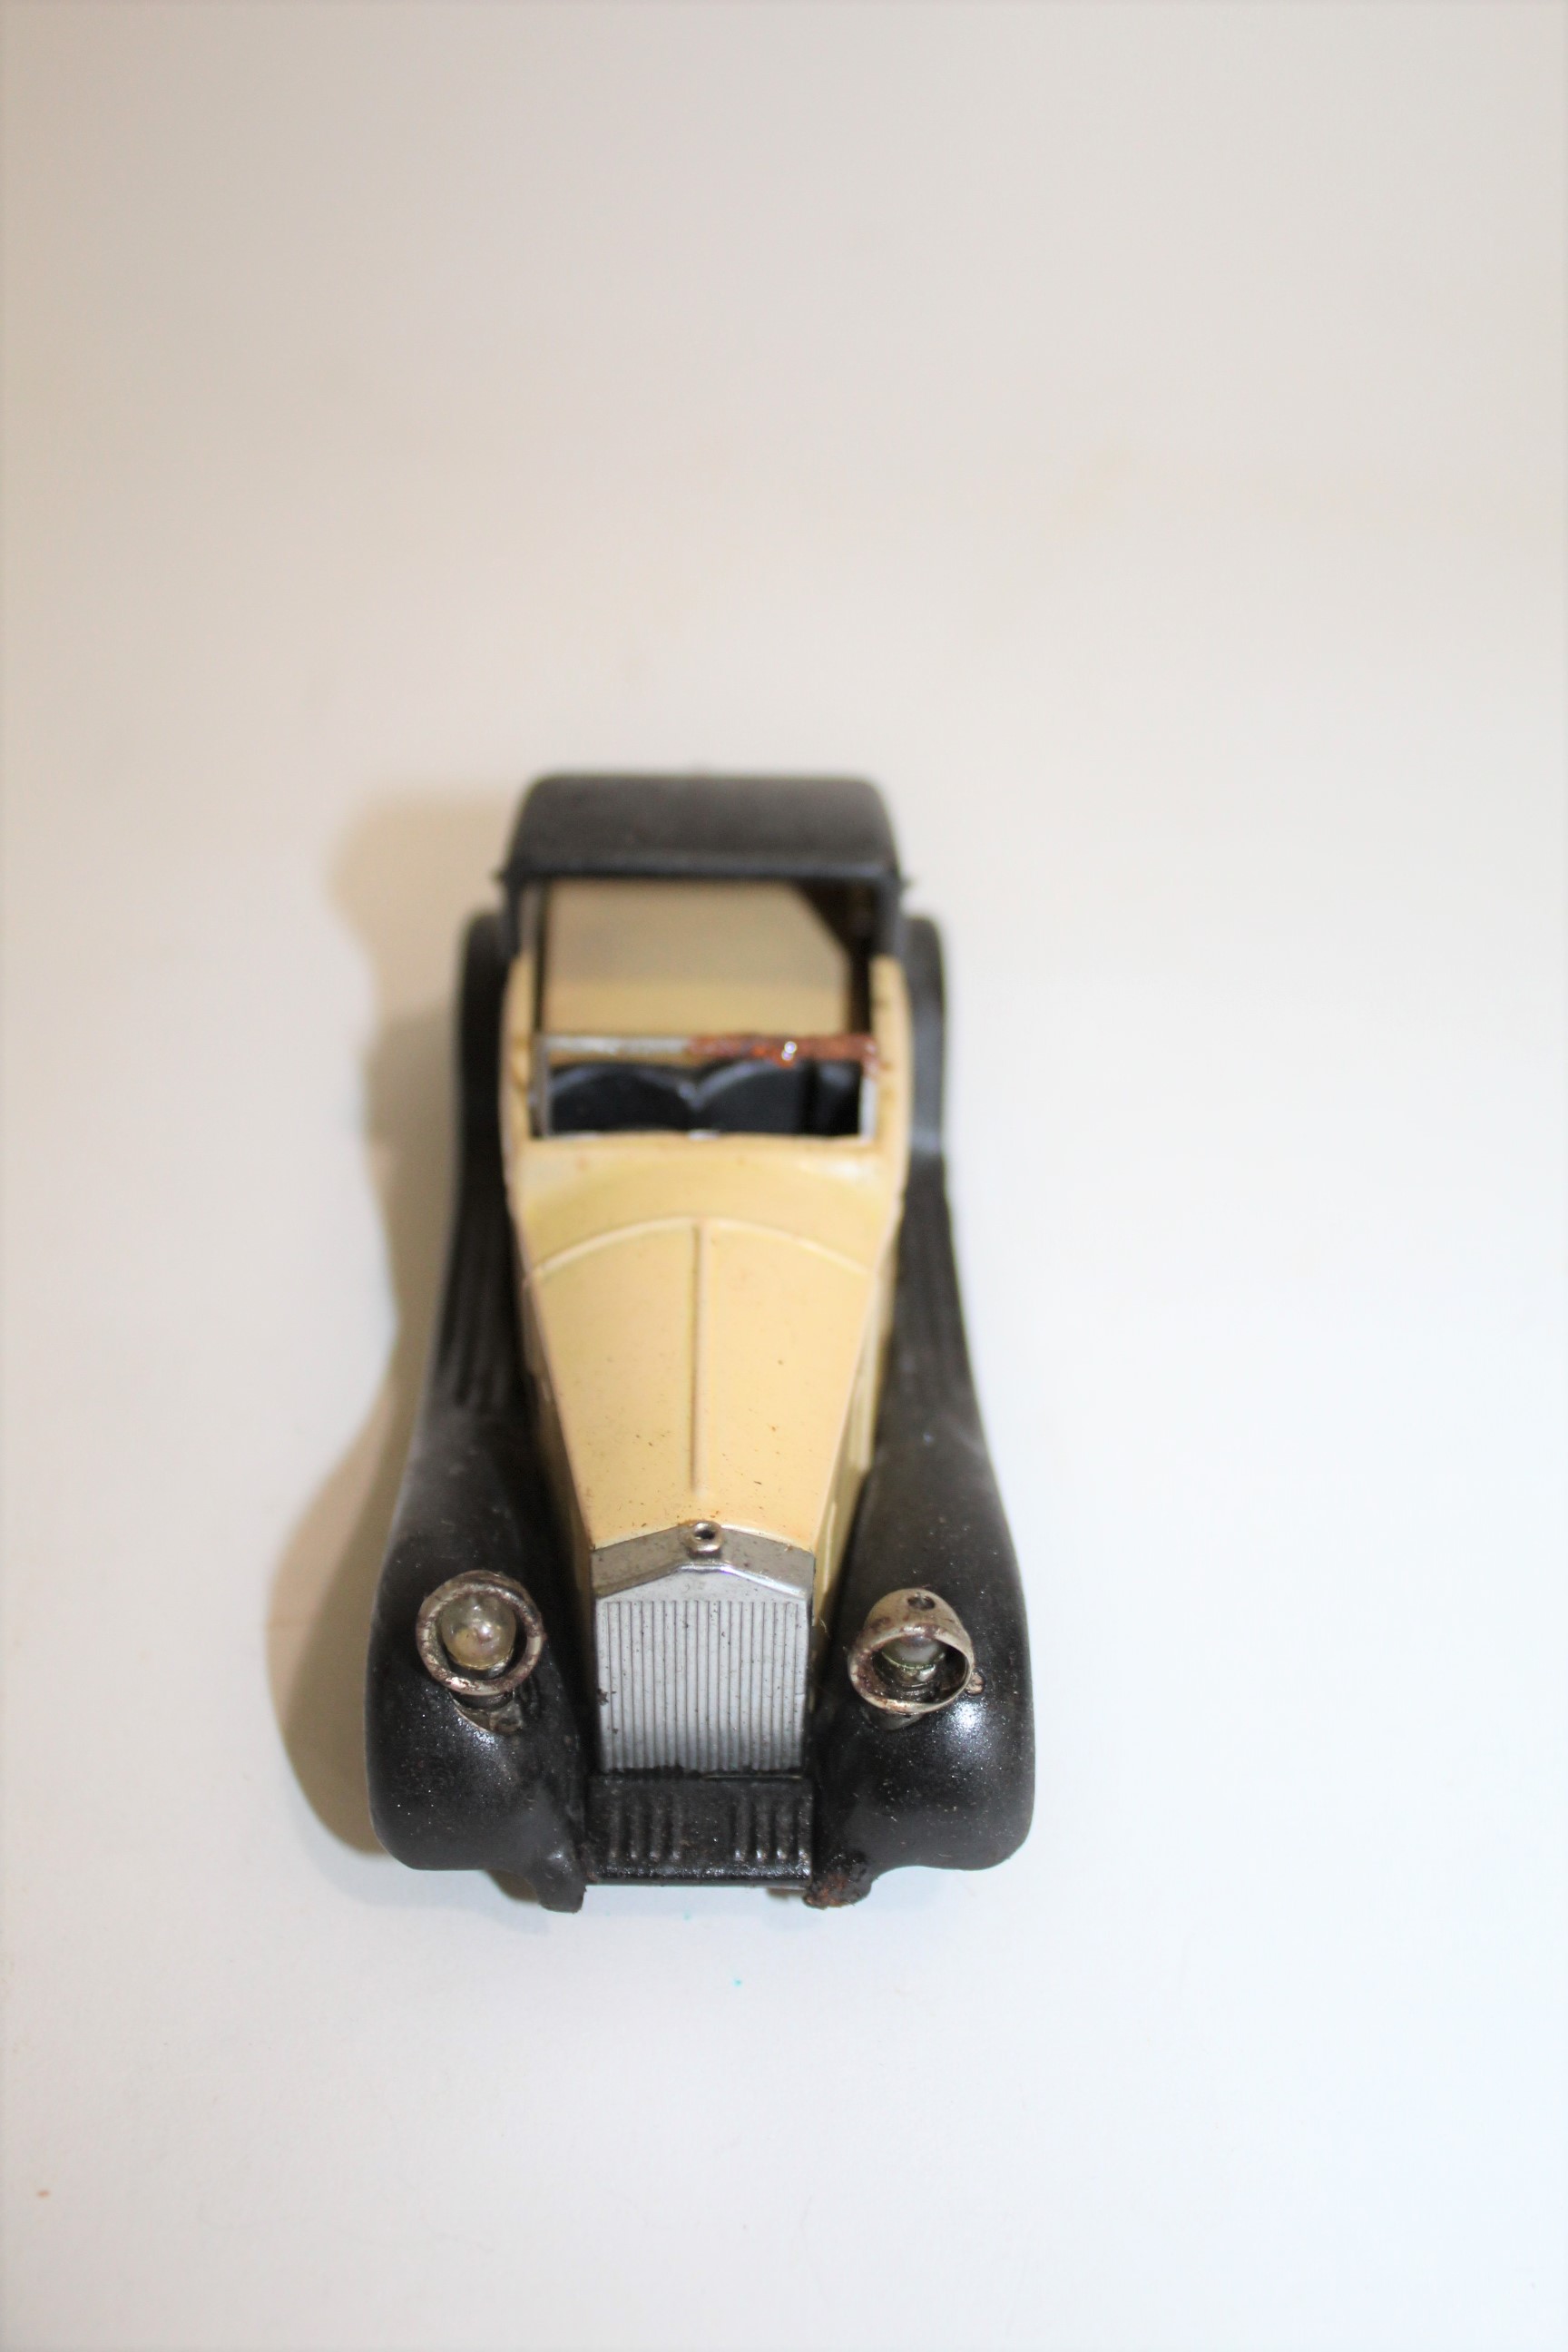 RARE TRIANG MINIC ROLLS ROYCE SEDANCA - ELECTRIC HEADLAMPS Model No 50M, with a black hood and wings - Image 8 of 14